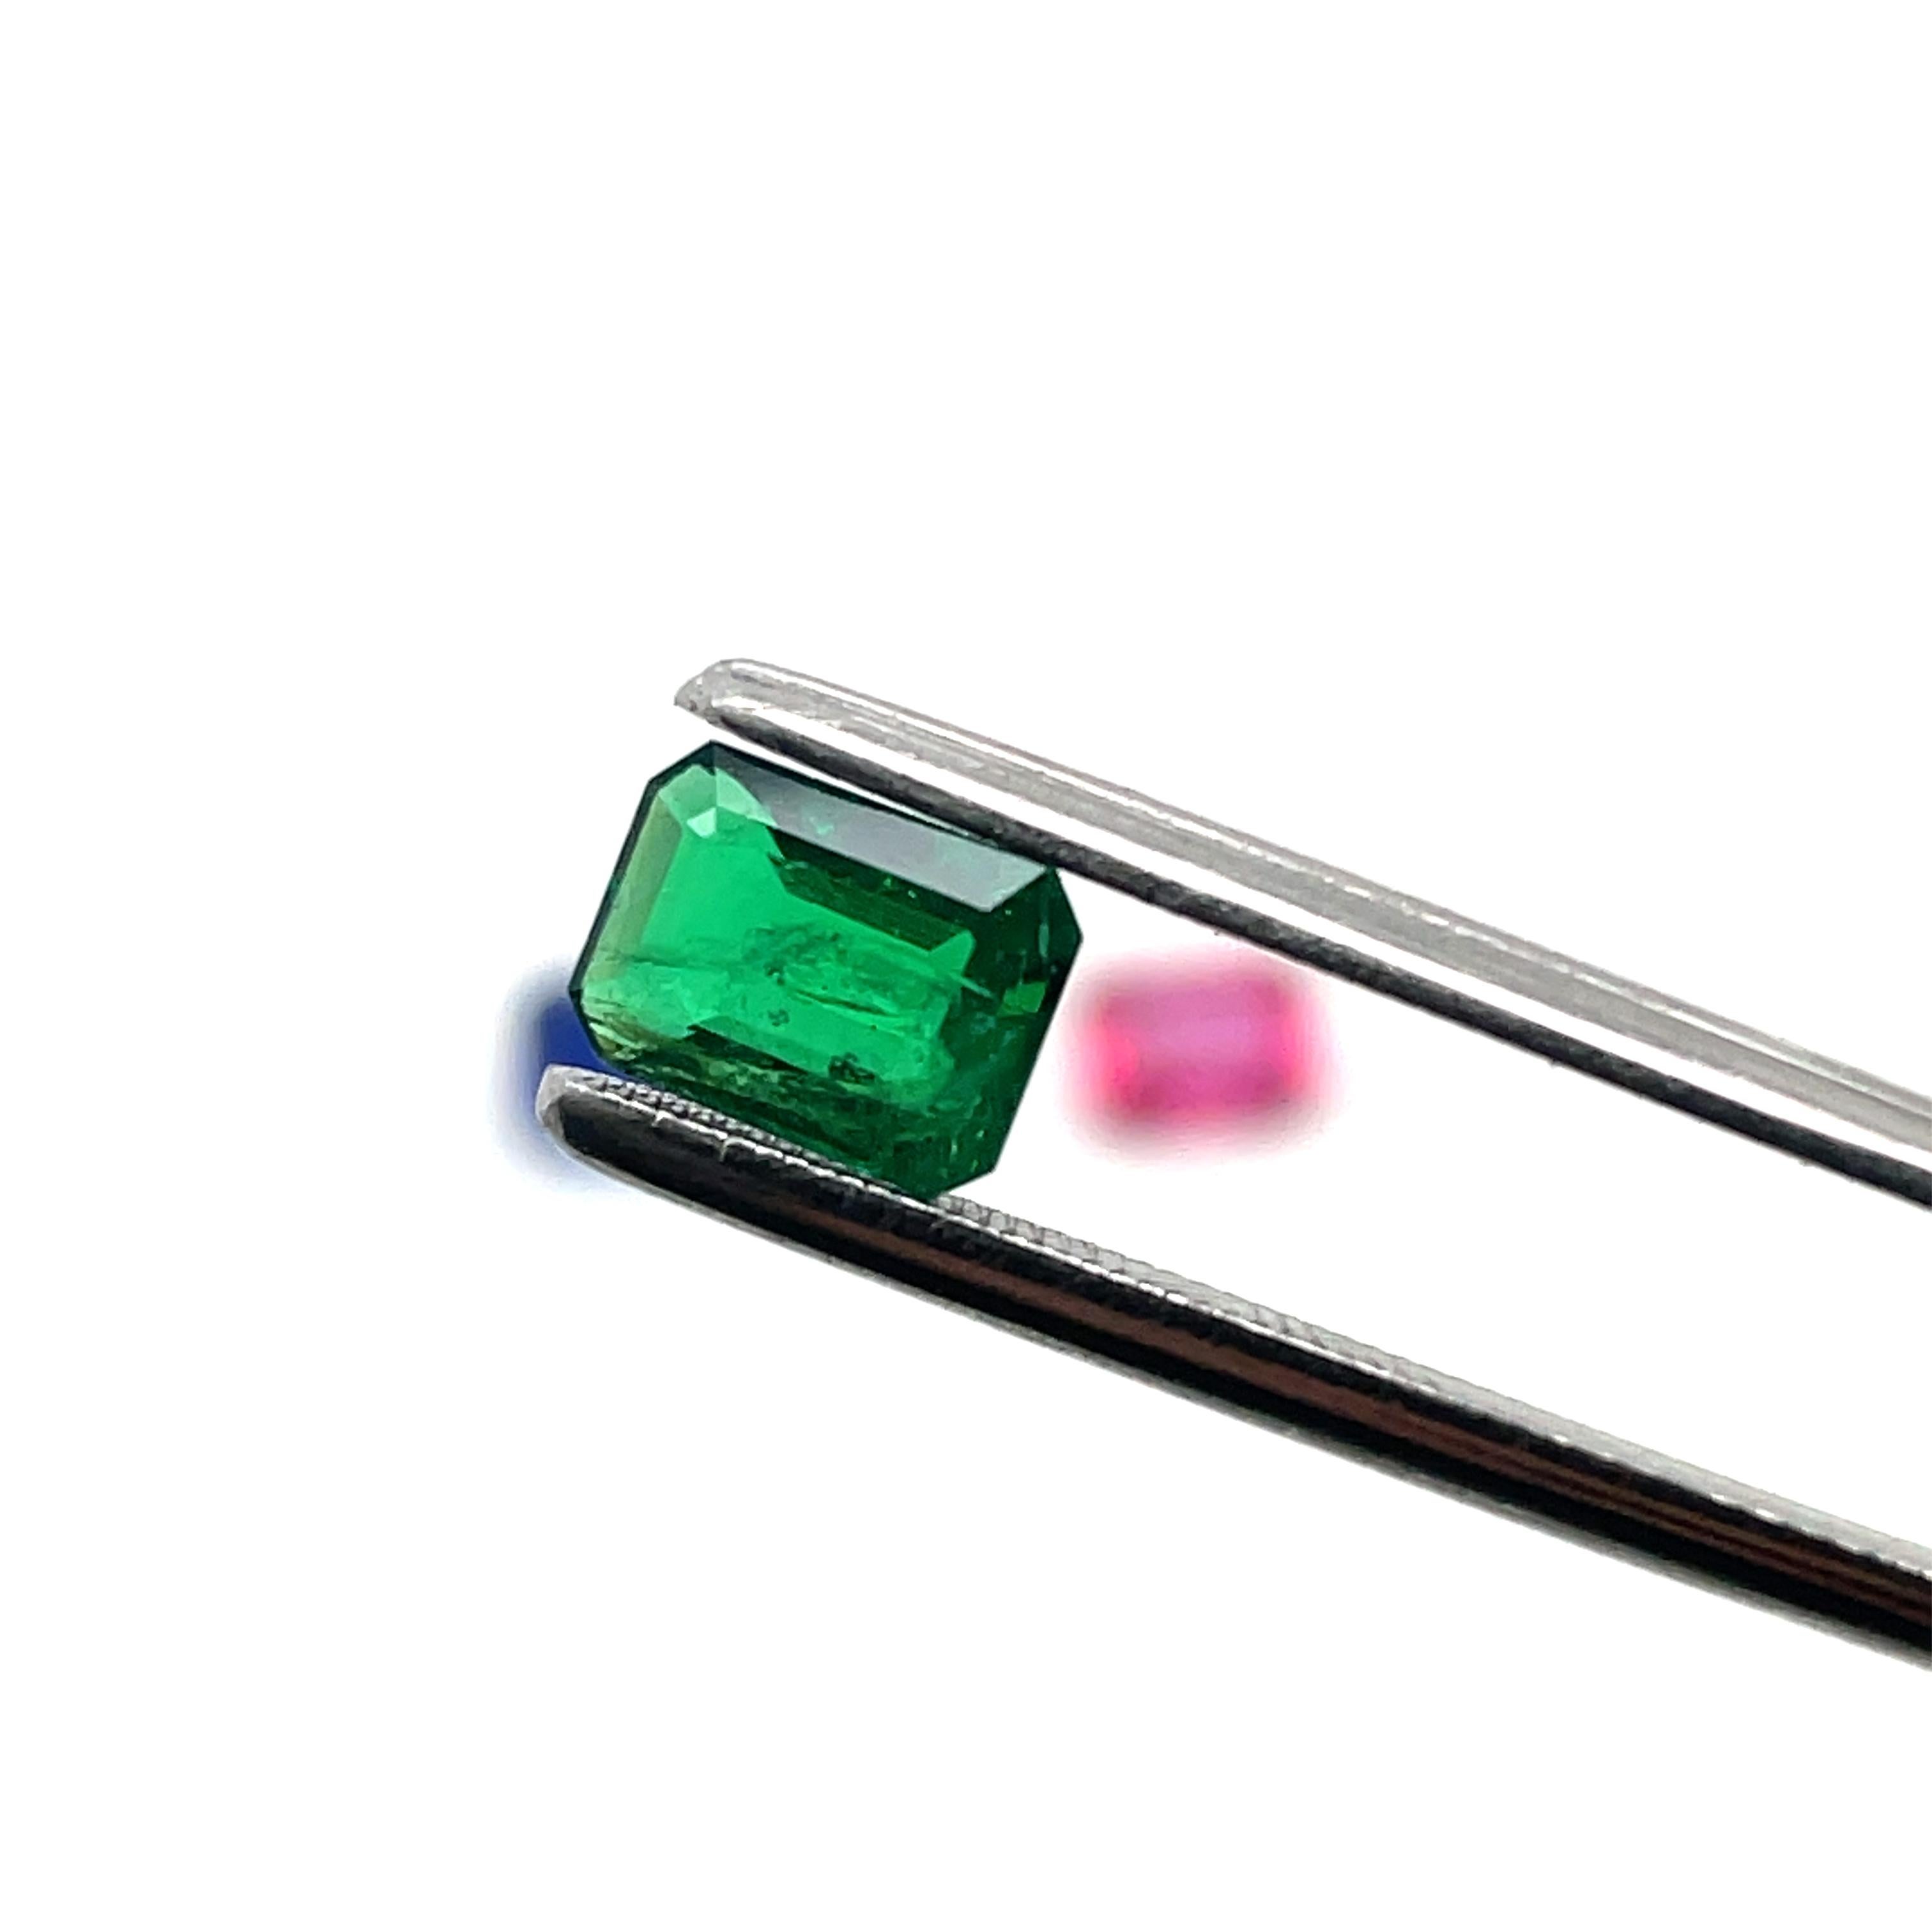 Emerald-Cut Ruby Cts 1.31 and Blue Sapphire Cts 2.16 and Emerald Cts 0.92 Loose  For Sale 5